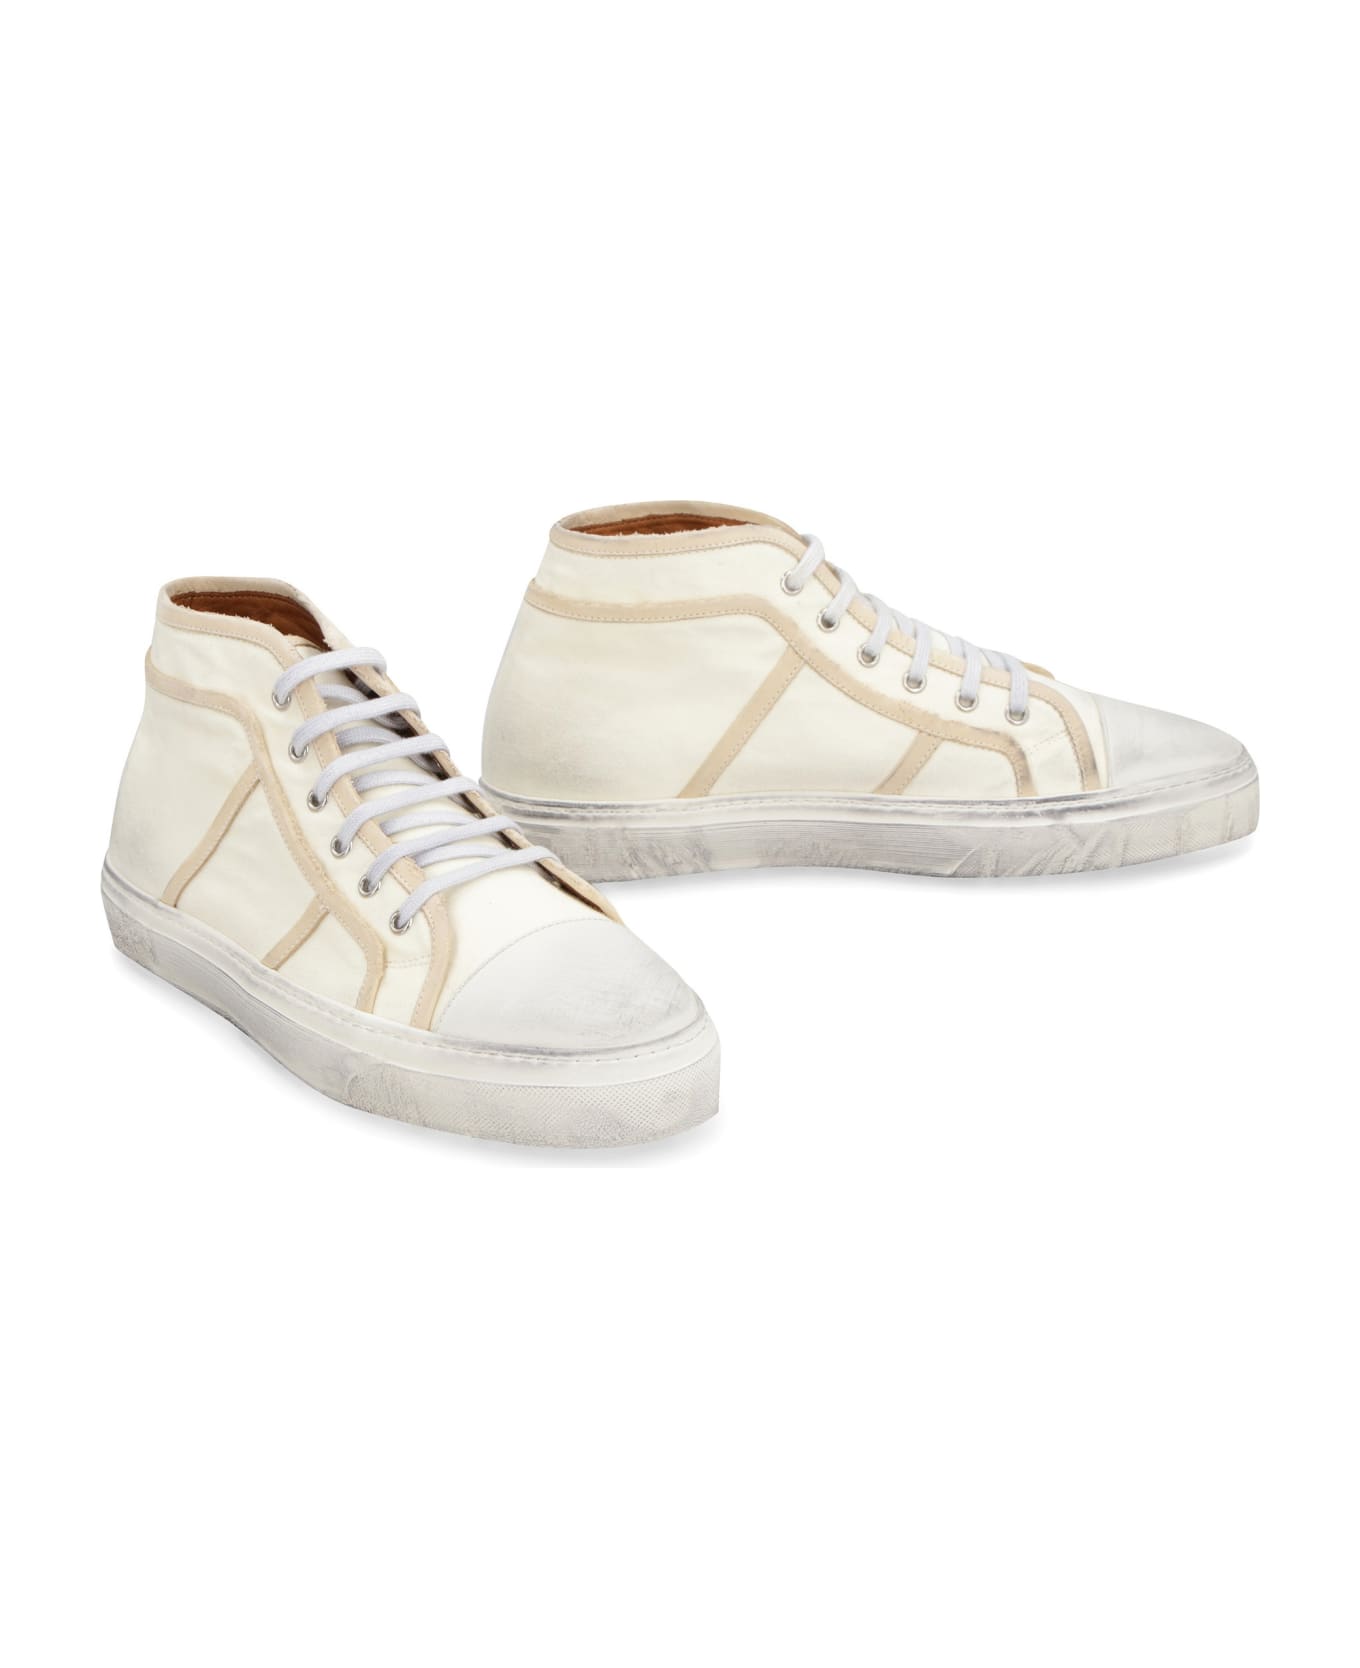 Dolce & Gabbana Canvas Mid-top Sneakers - Ivory